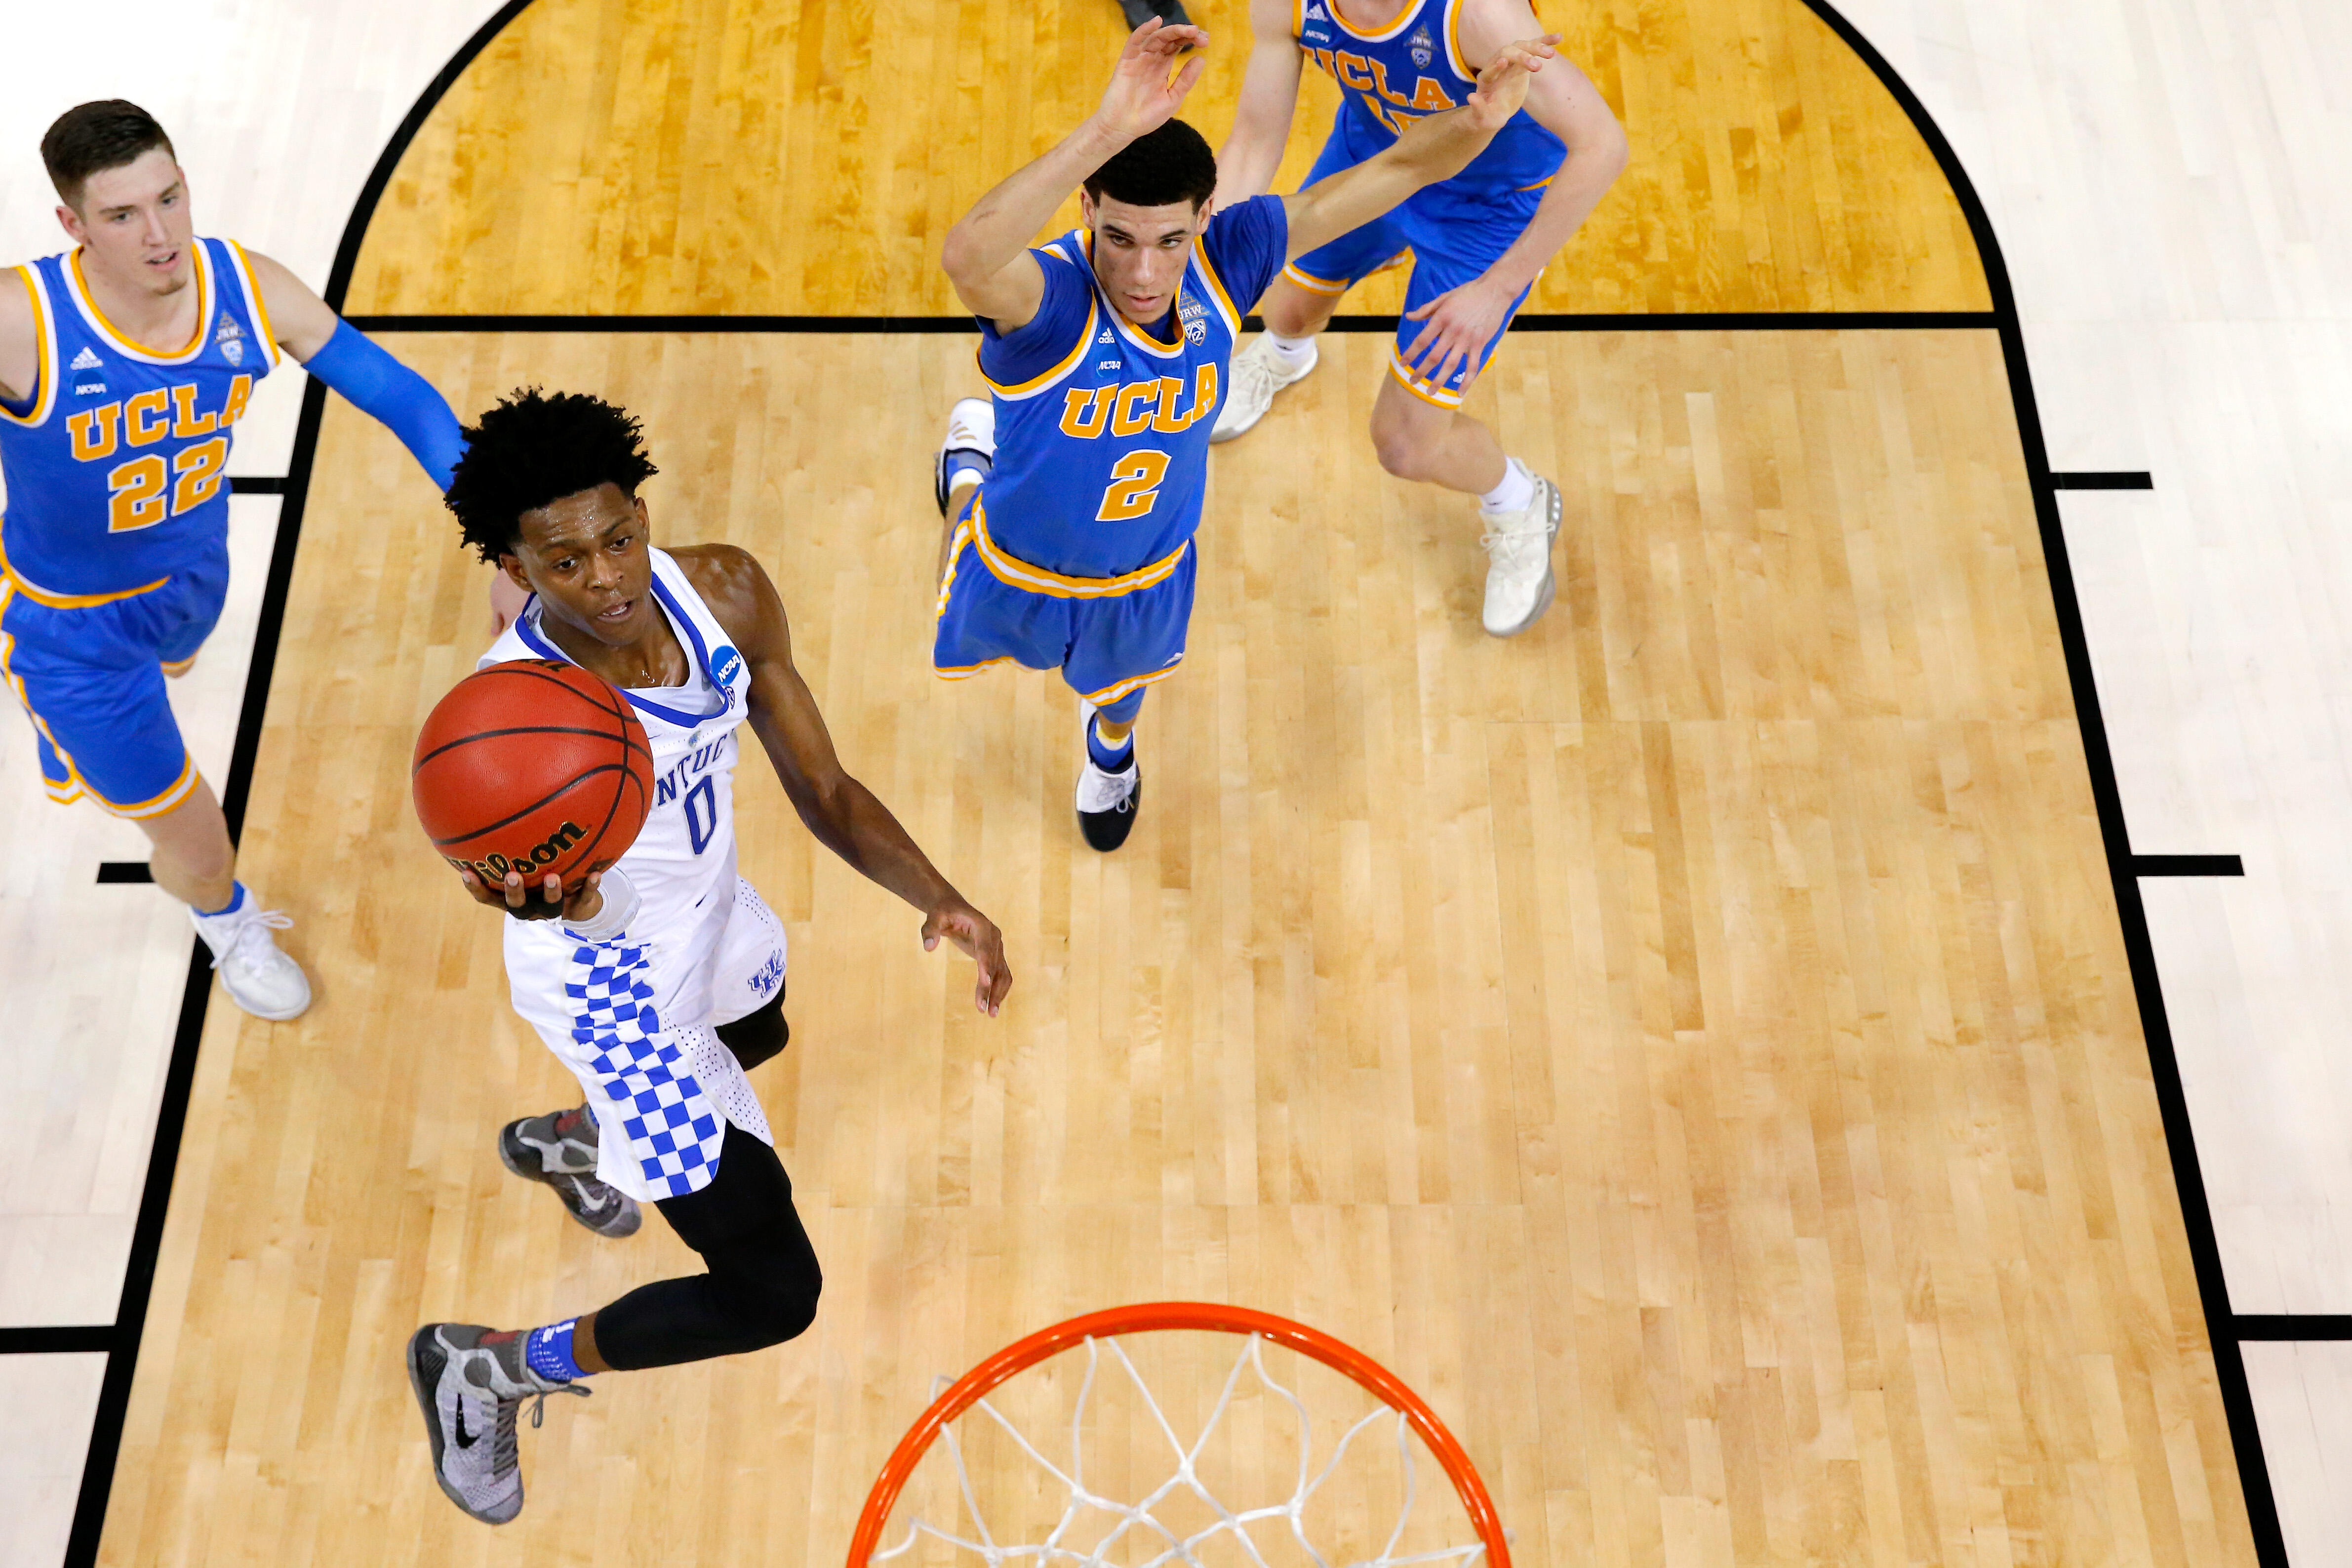 MEMPHIS, TN - MARCH 24: De'Aaron Fox #0 of the Kentucky Wildcats drives to the basket against Lonzo Ball #2 of the UCLA Bruins in the first half during the 2017 NCAA Men's Basketball Tournament South Regional at FedExForum on March 24, 2017 in Memphis, Te